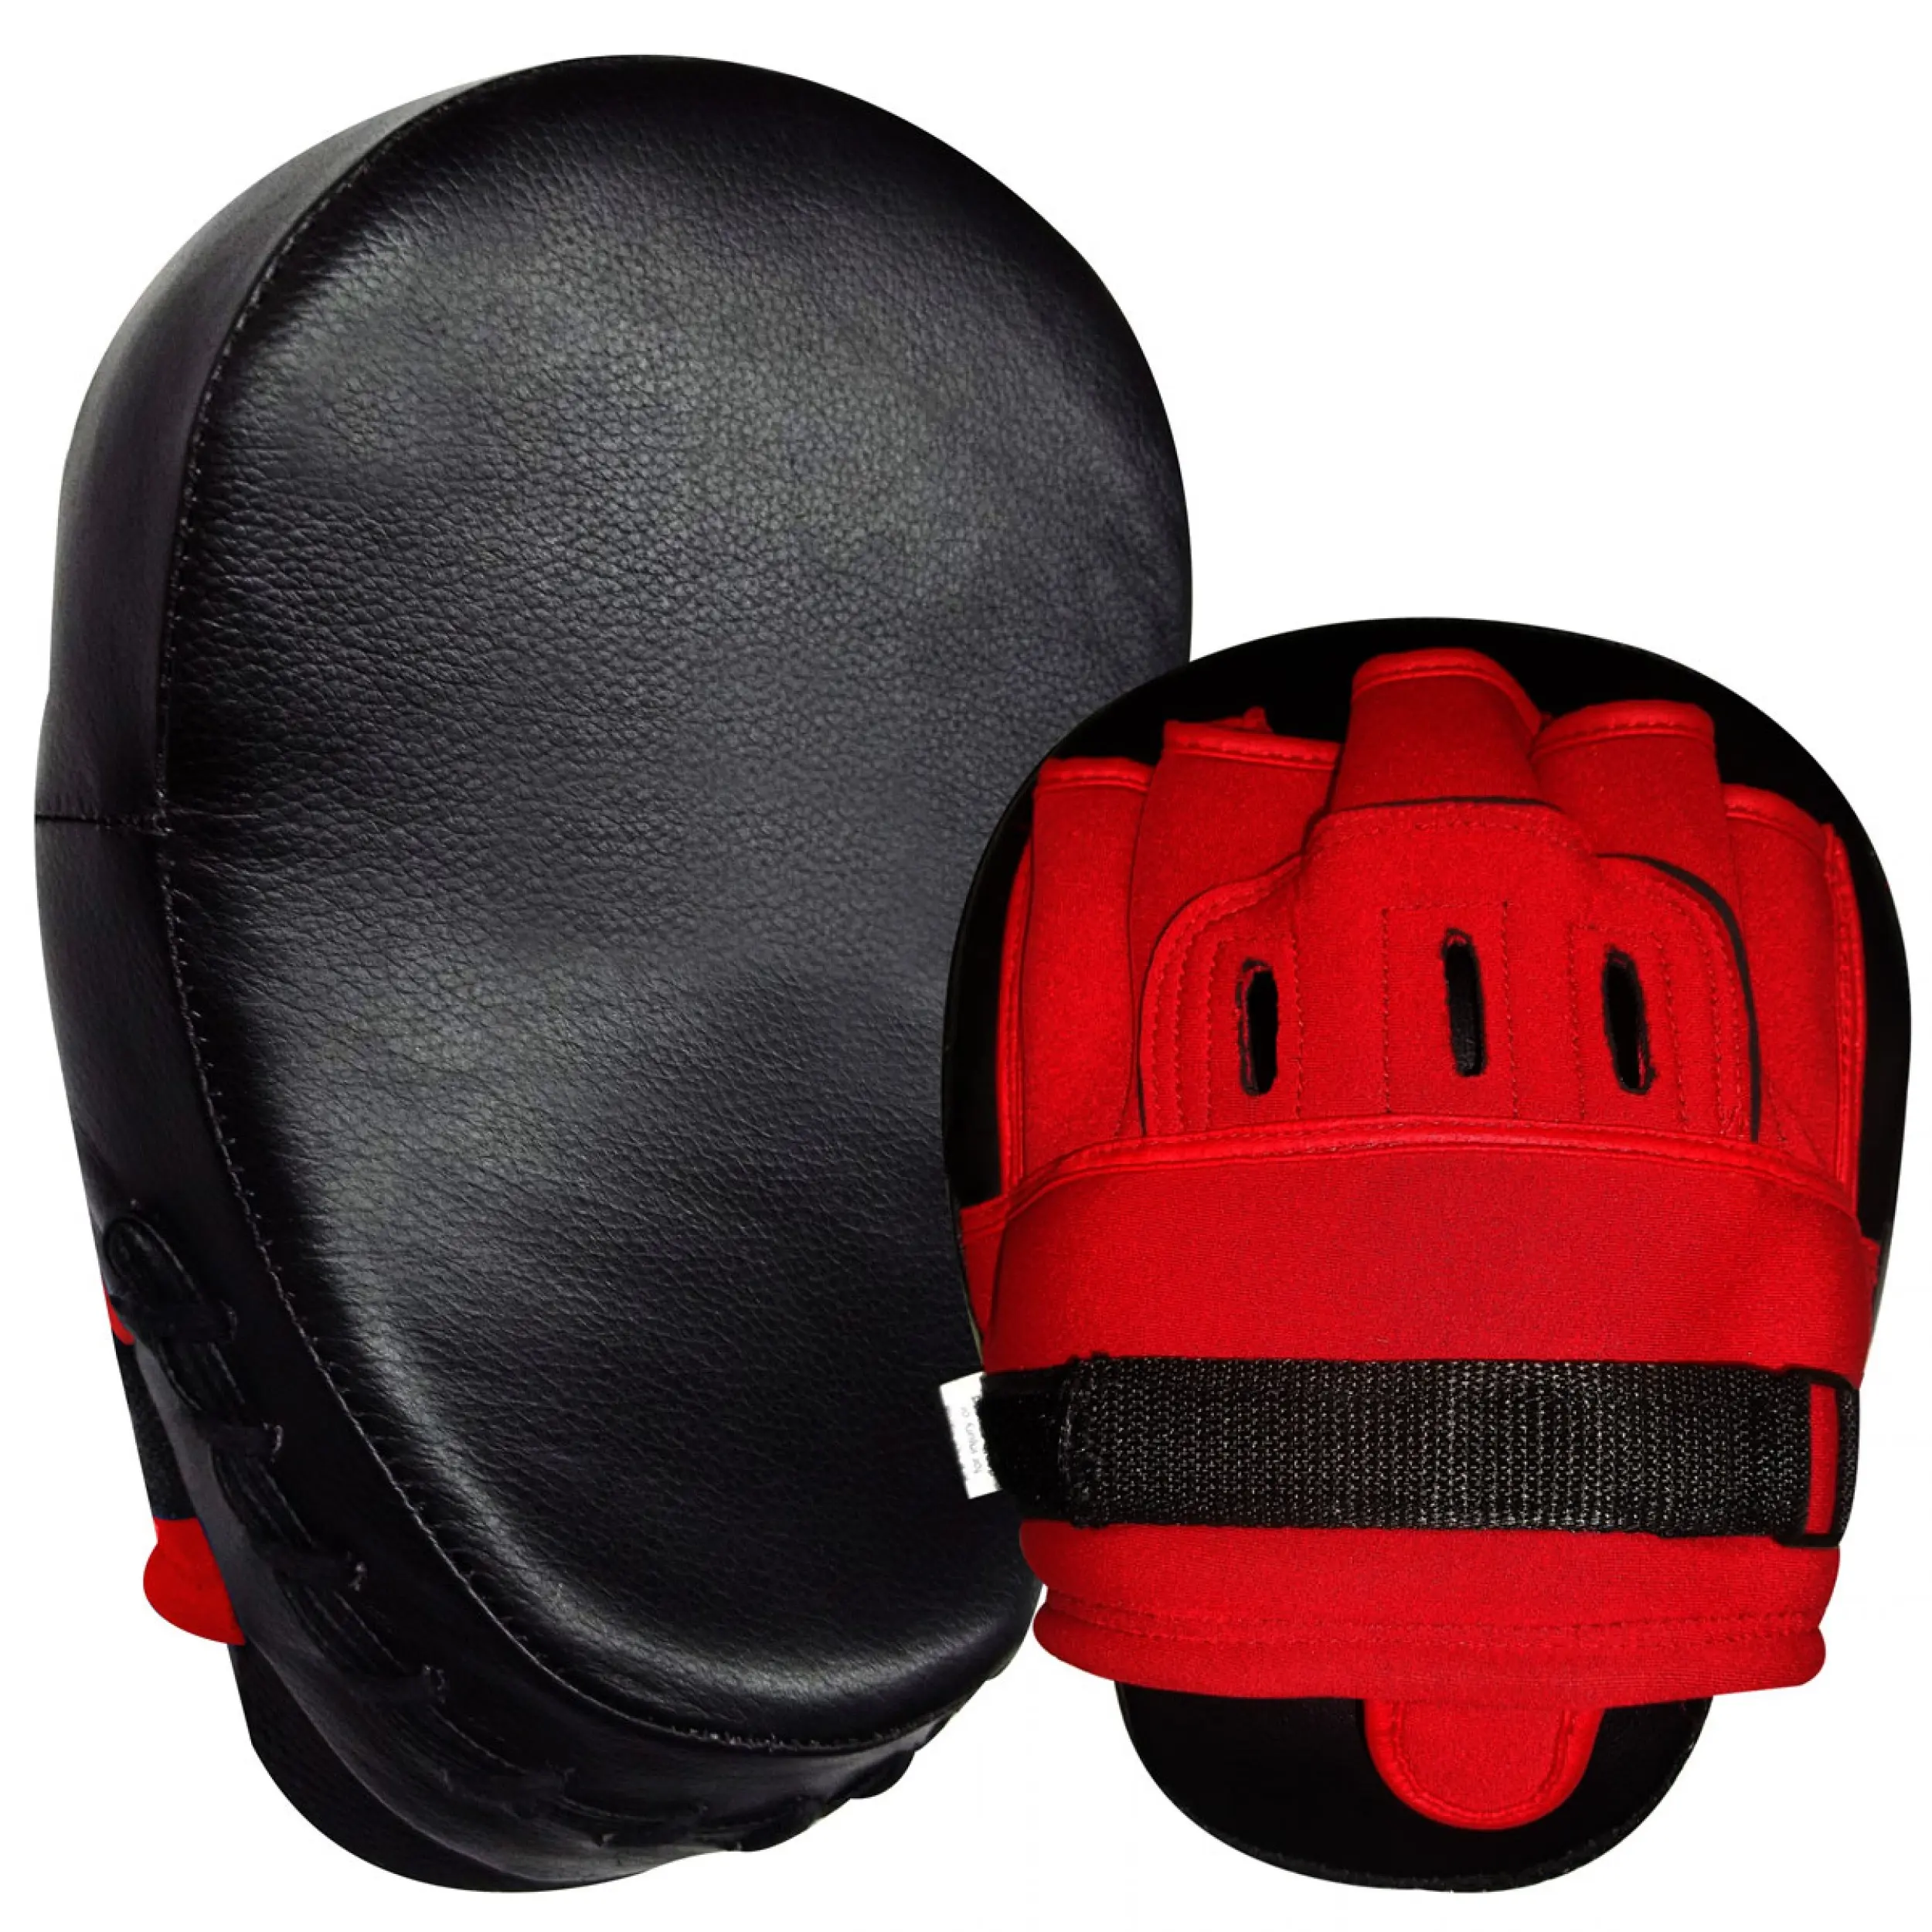 Focus Pads Focus Mitt PK Cowhide Leather for Boxing Training Perfect for Boxing and Karate Coaching High Quality Real Leather